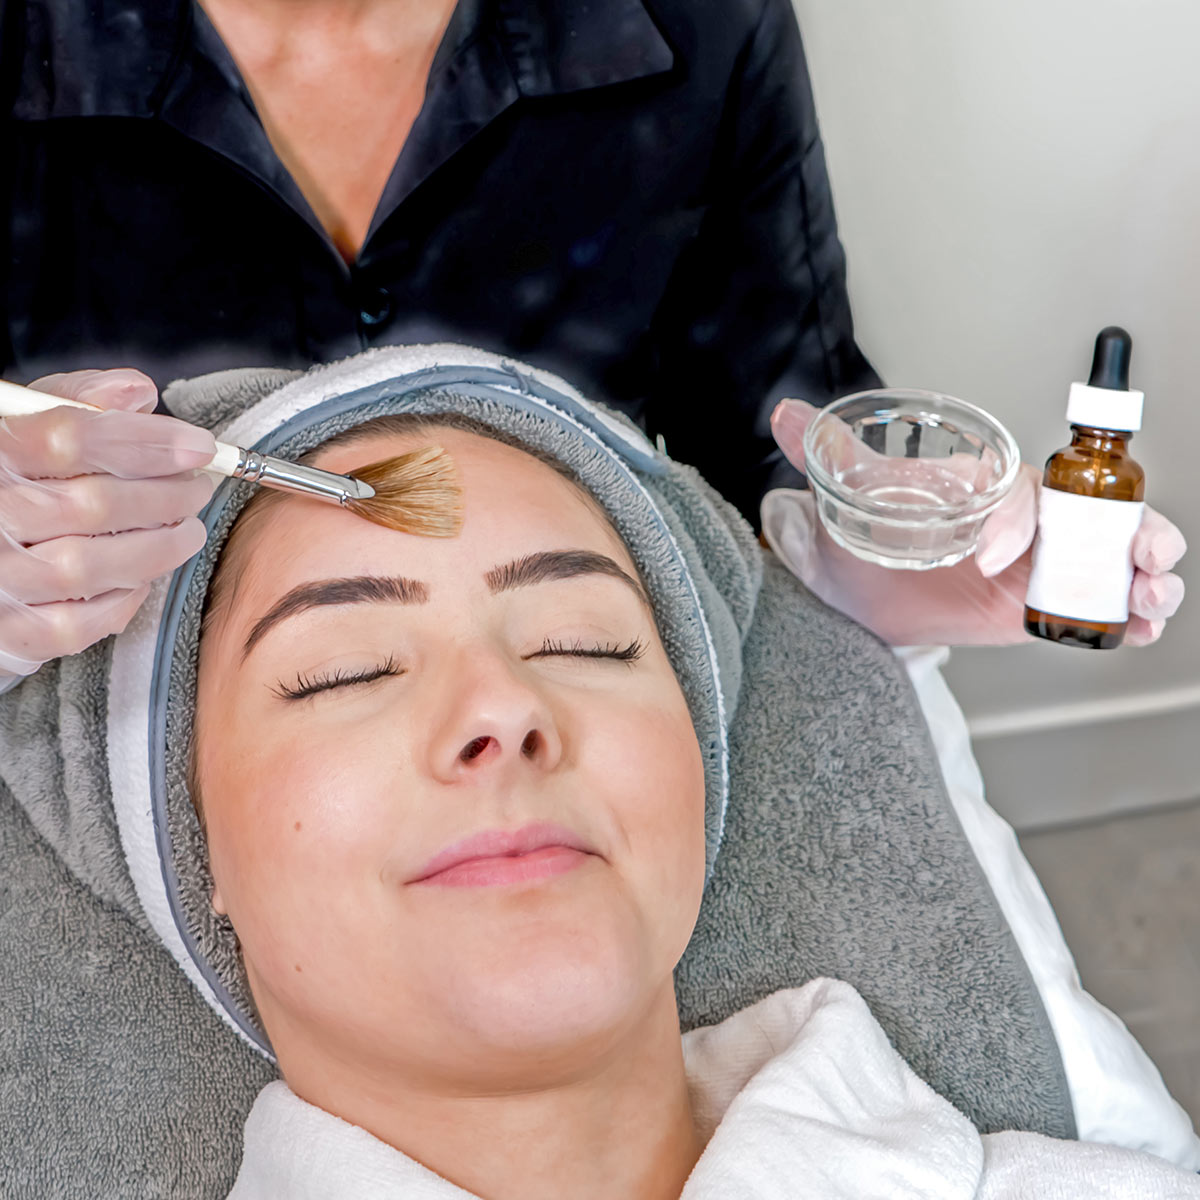 A woman with a towel around her head receives a chemical peel treatment to her face from an esthetician.